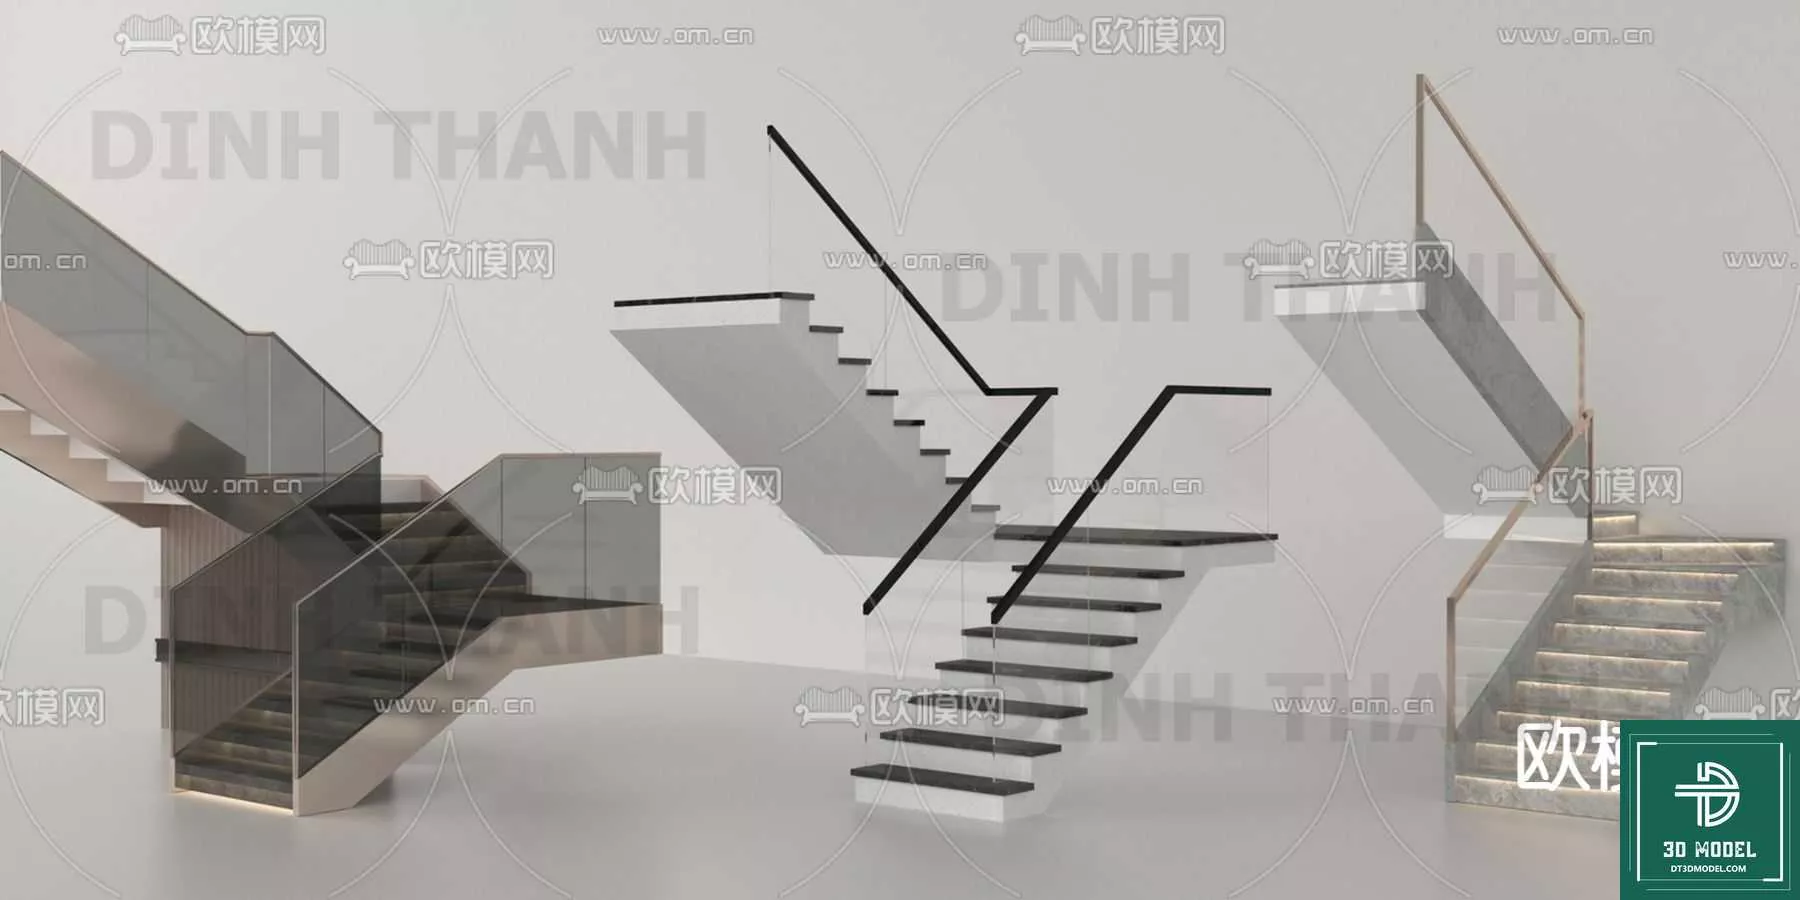 MODERN STAIR - SKETCHUP 3D MODEL - VRAY OR ENSCAPE - ID14237